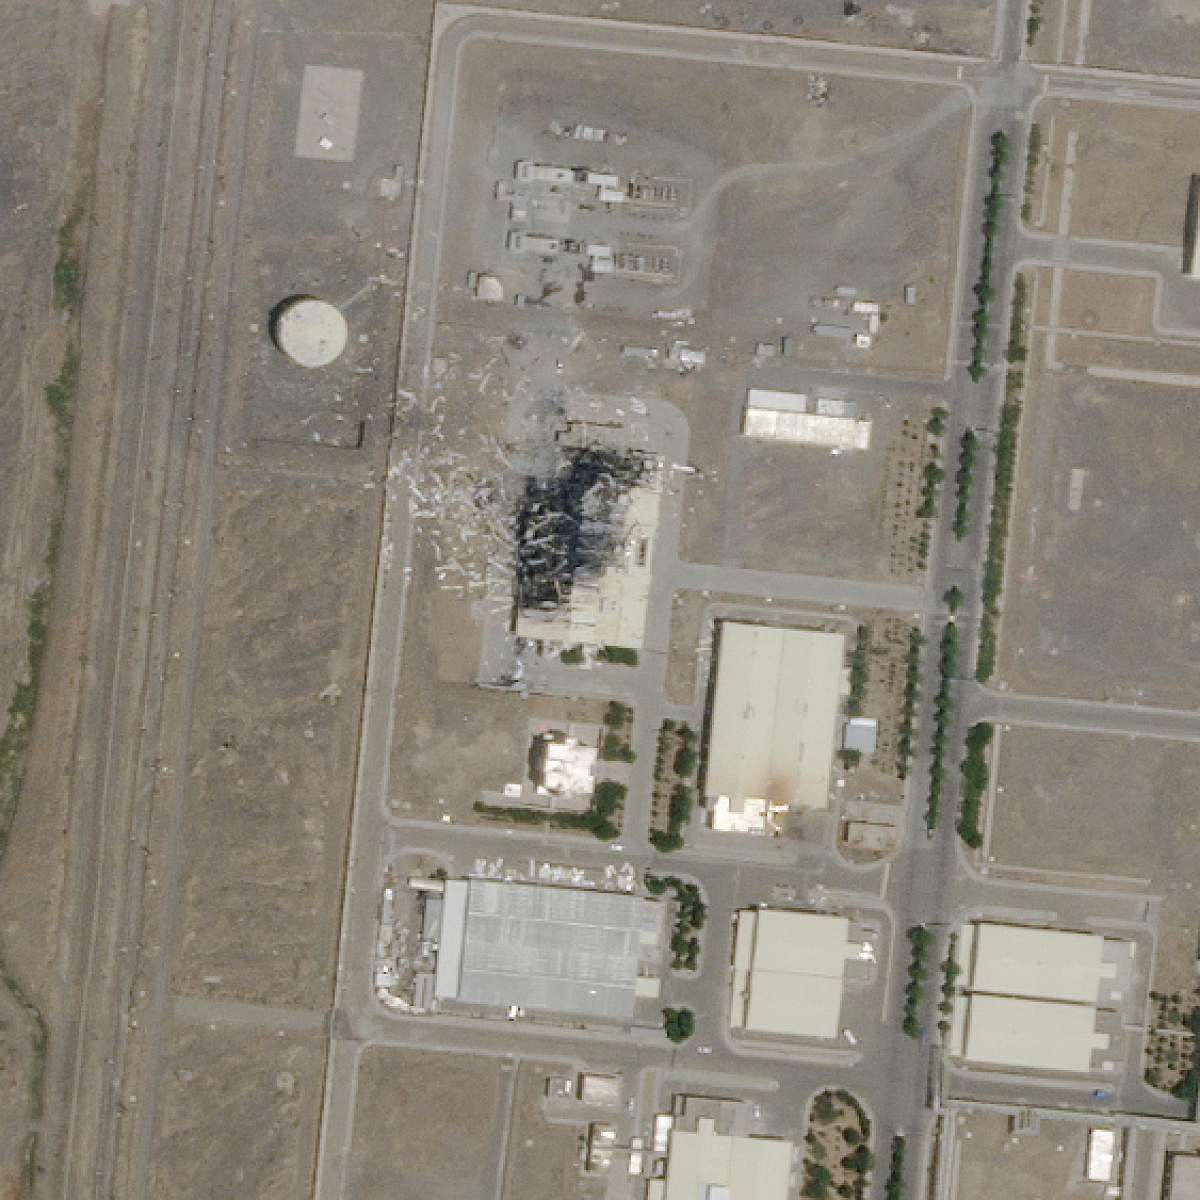 Mysterious damage to Iran nuclear site: What we know